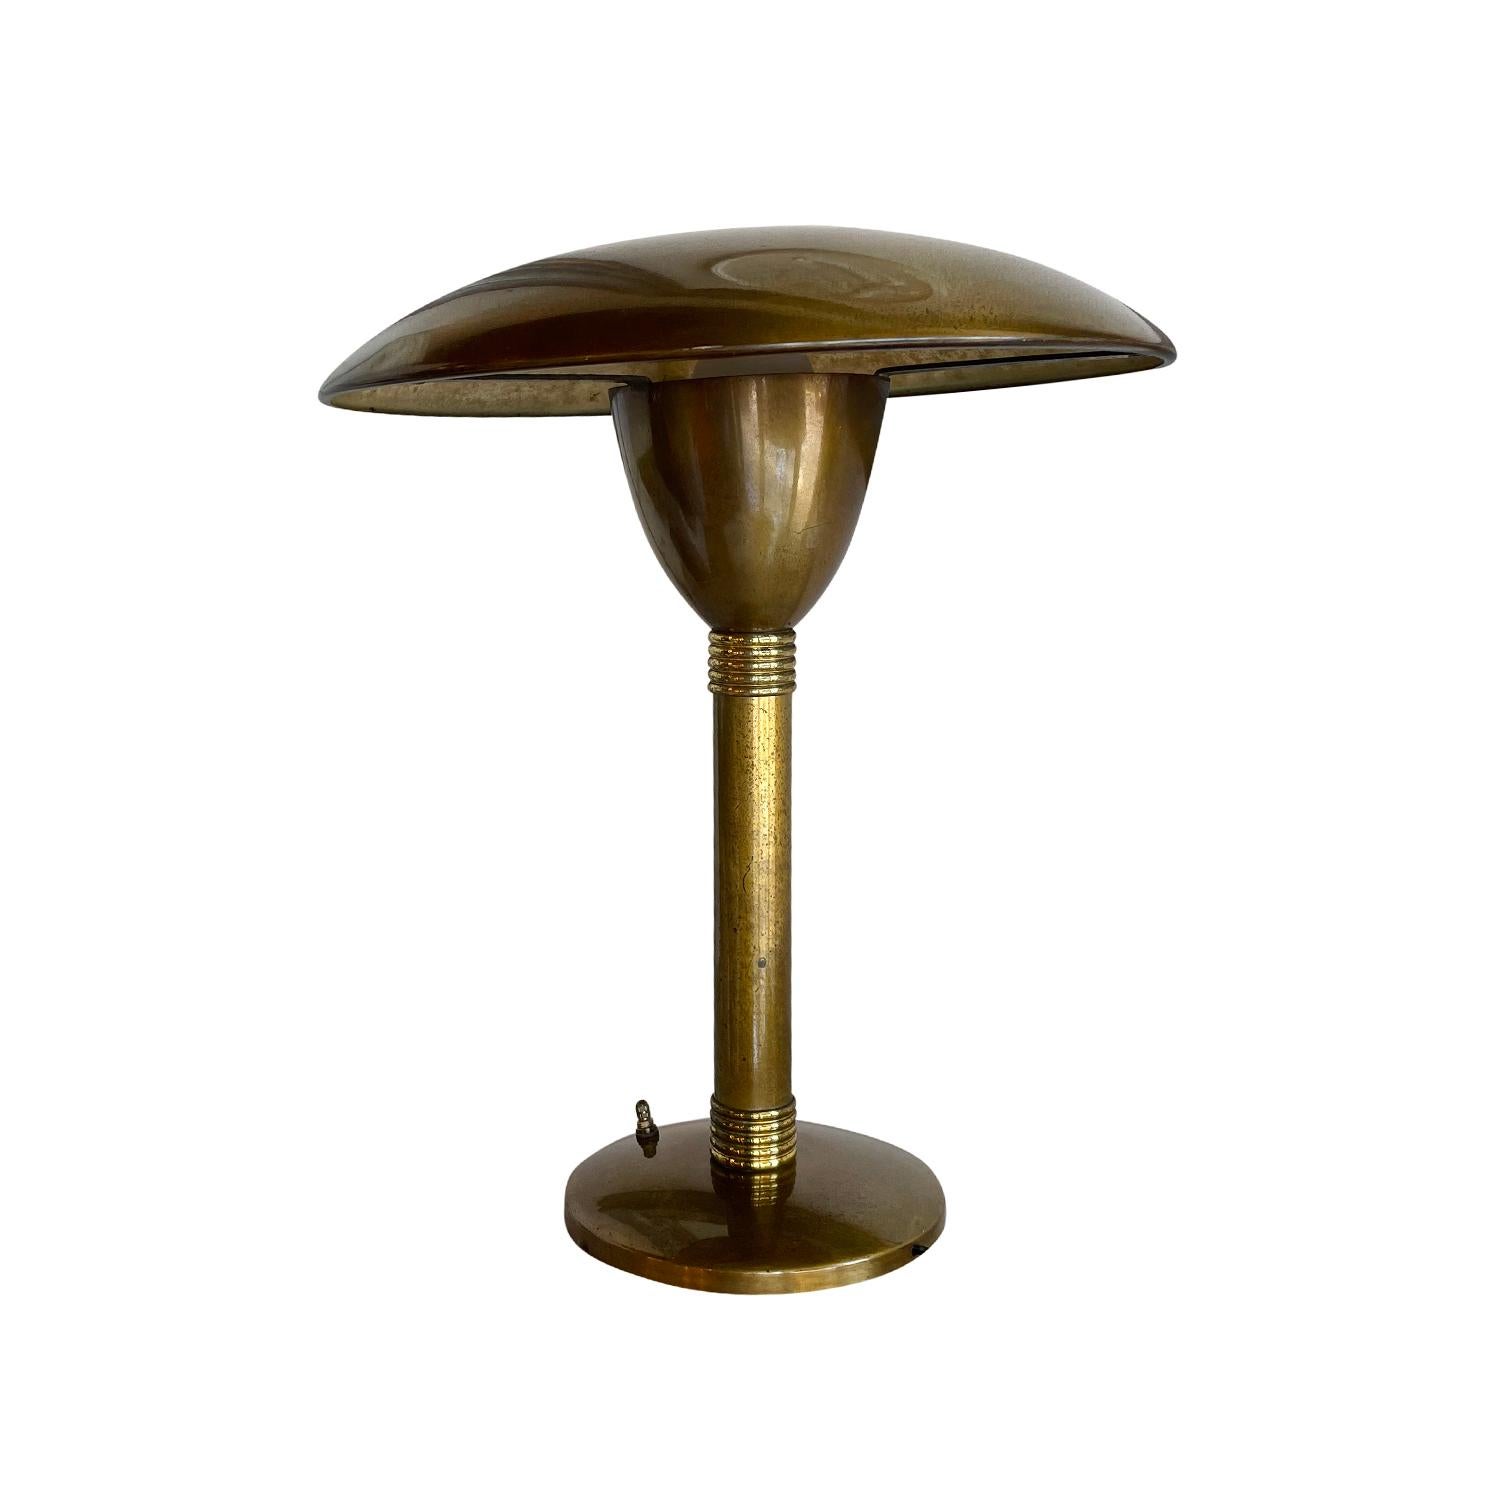 A gold-brown, vintage Mid-Century Modern Italian table lamp made of hand crafted metal and brass with an oval shade, featuring a one light socket. Designed by Angelo Gaetano Sciolari in good condition. The neck of desk light is enhanced by detailed